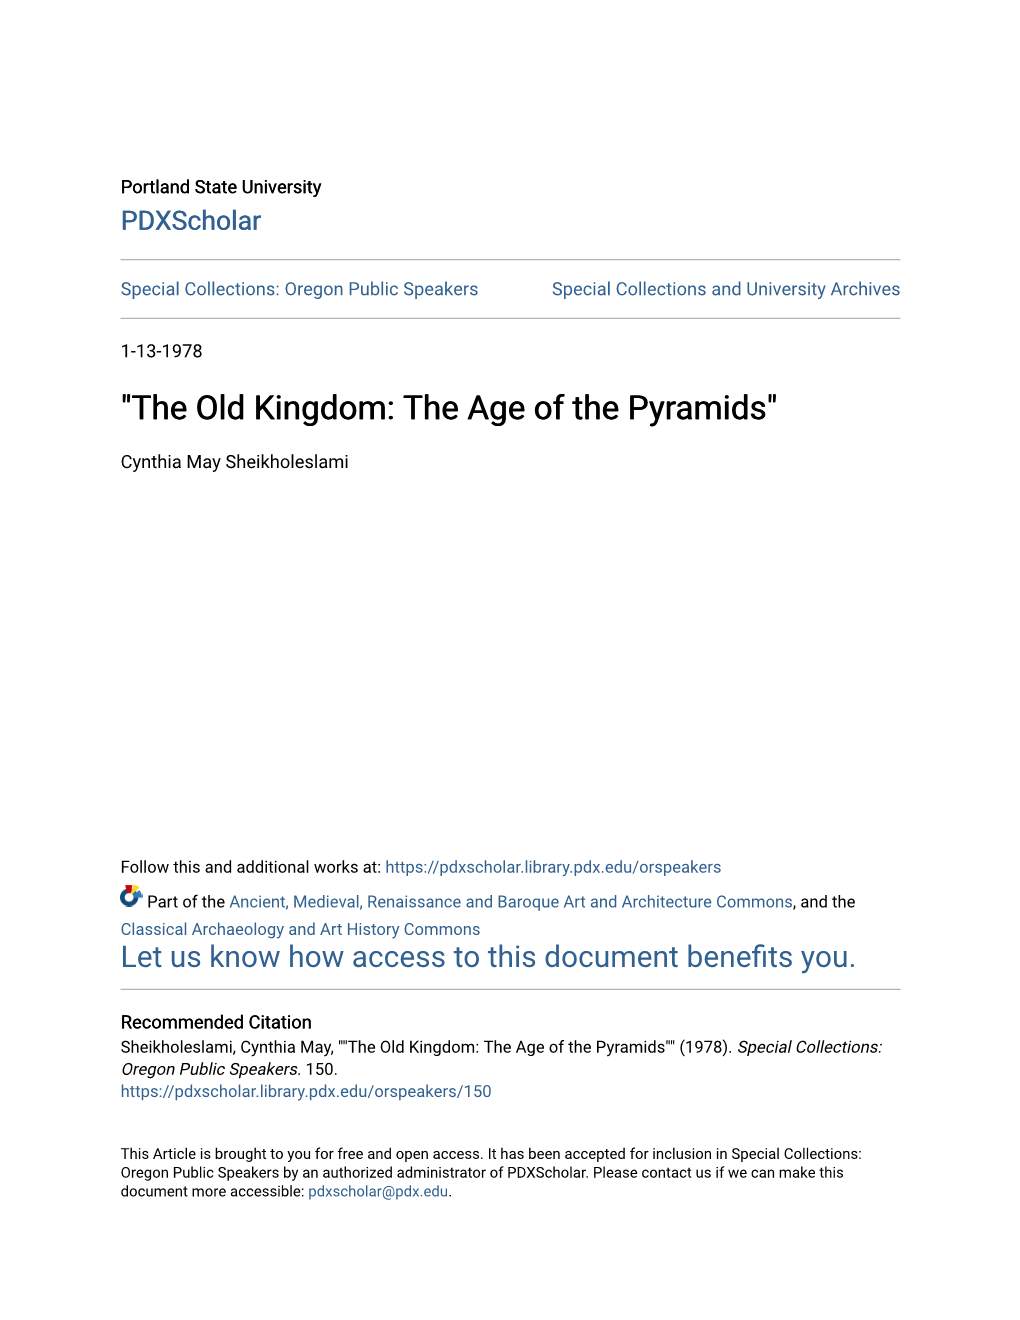 "The Old Kingdom: the Age of the Pyramids"